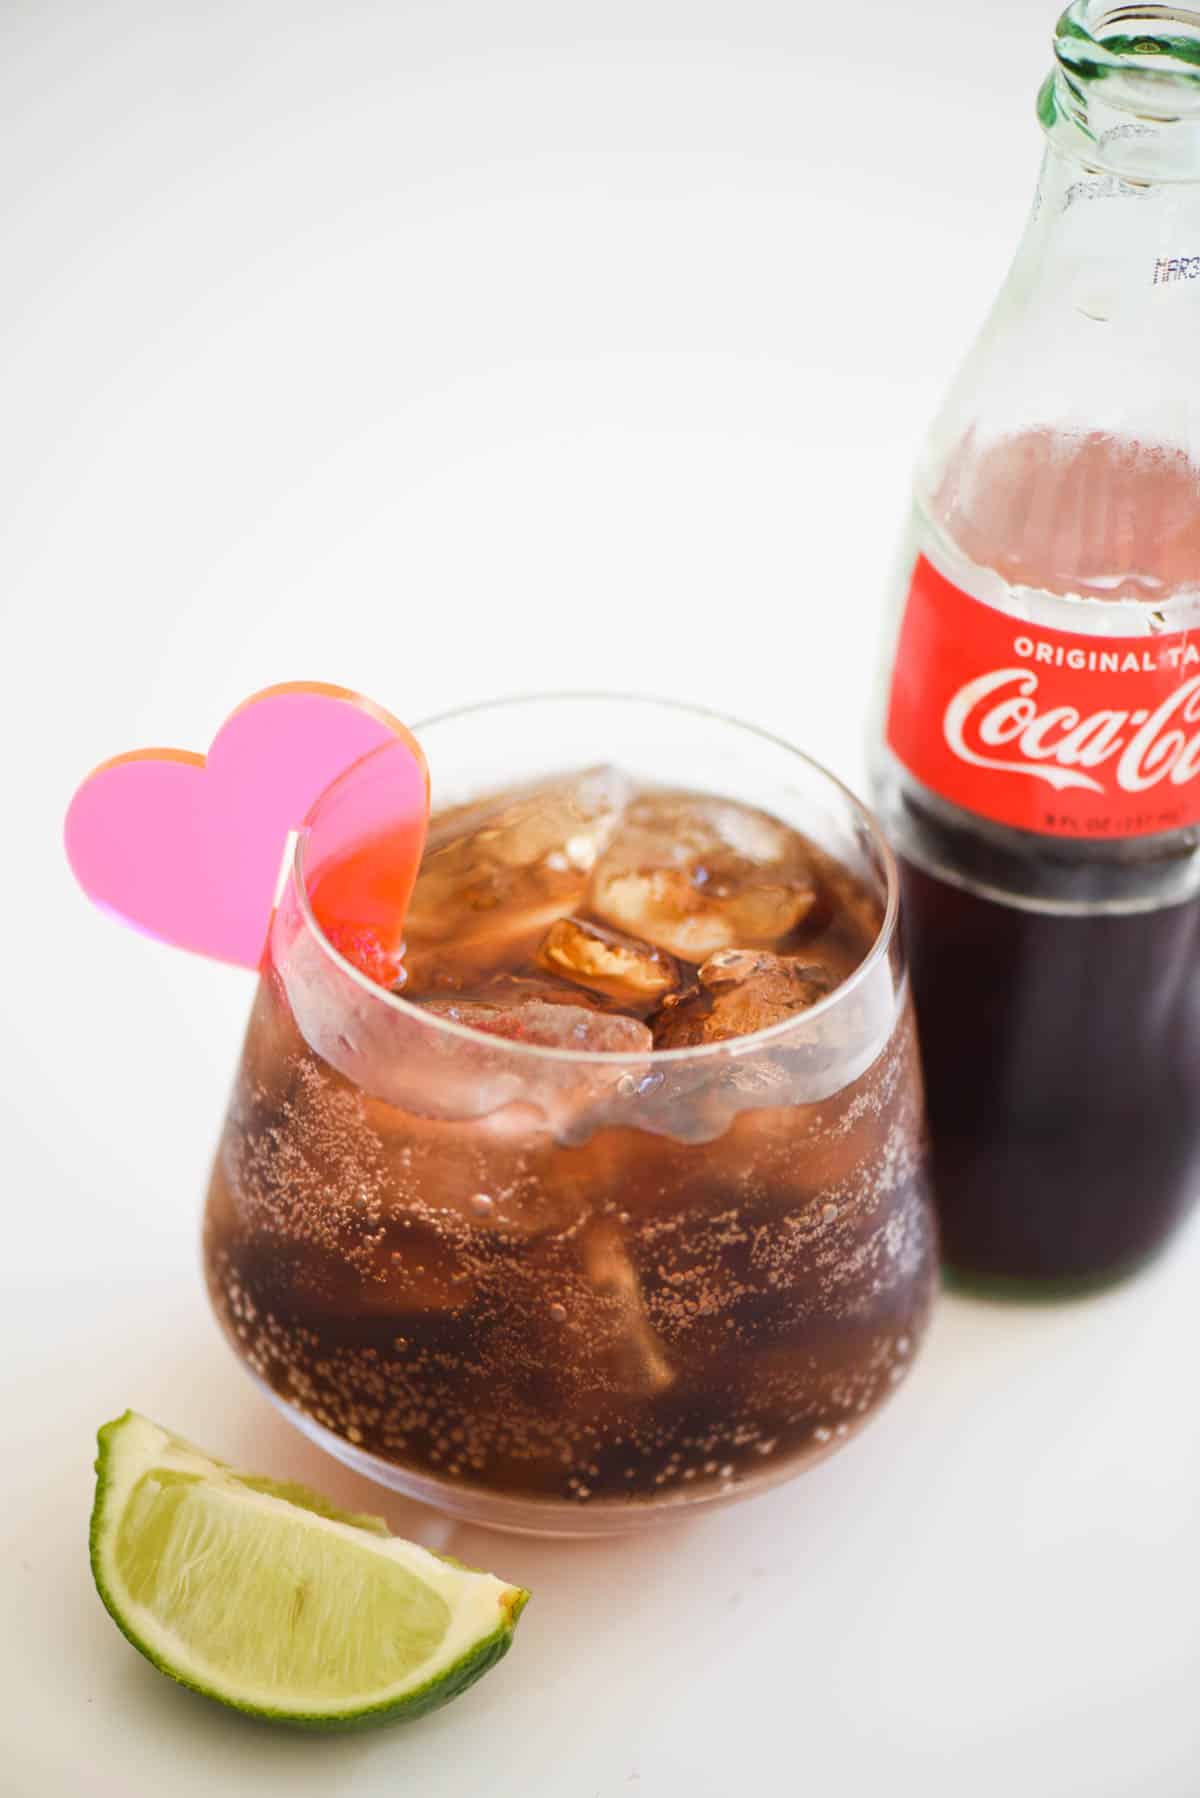 A close up of a glass of coke and tequila and a garnish of lime.